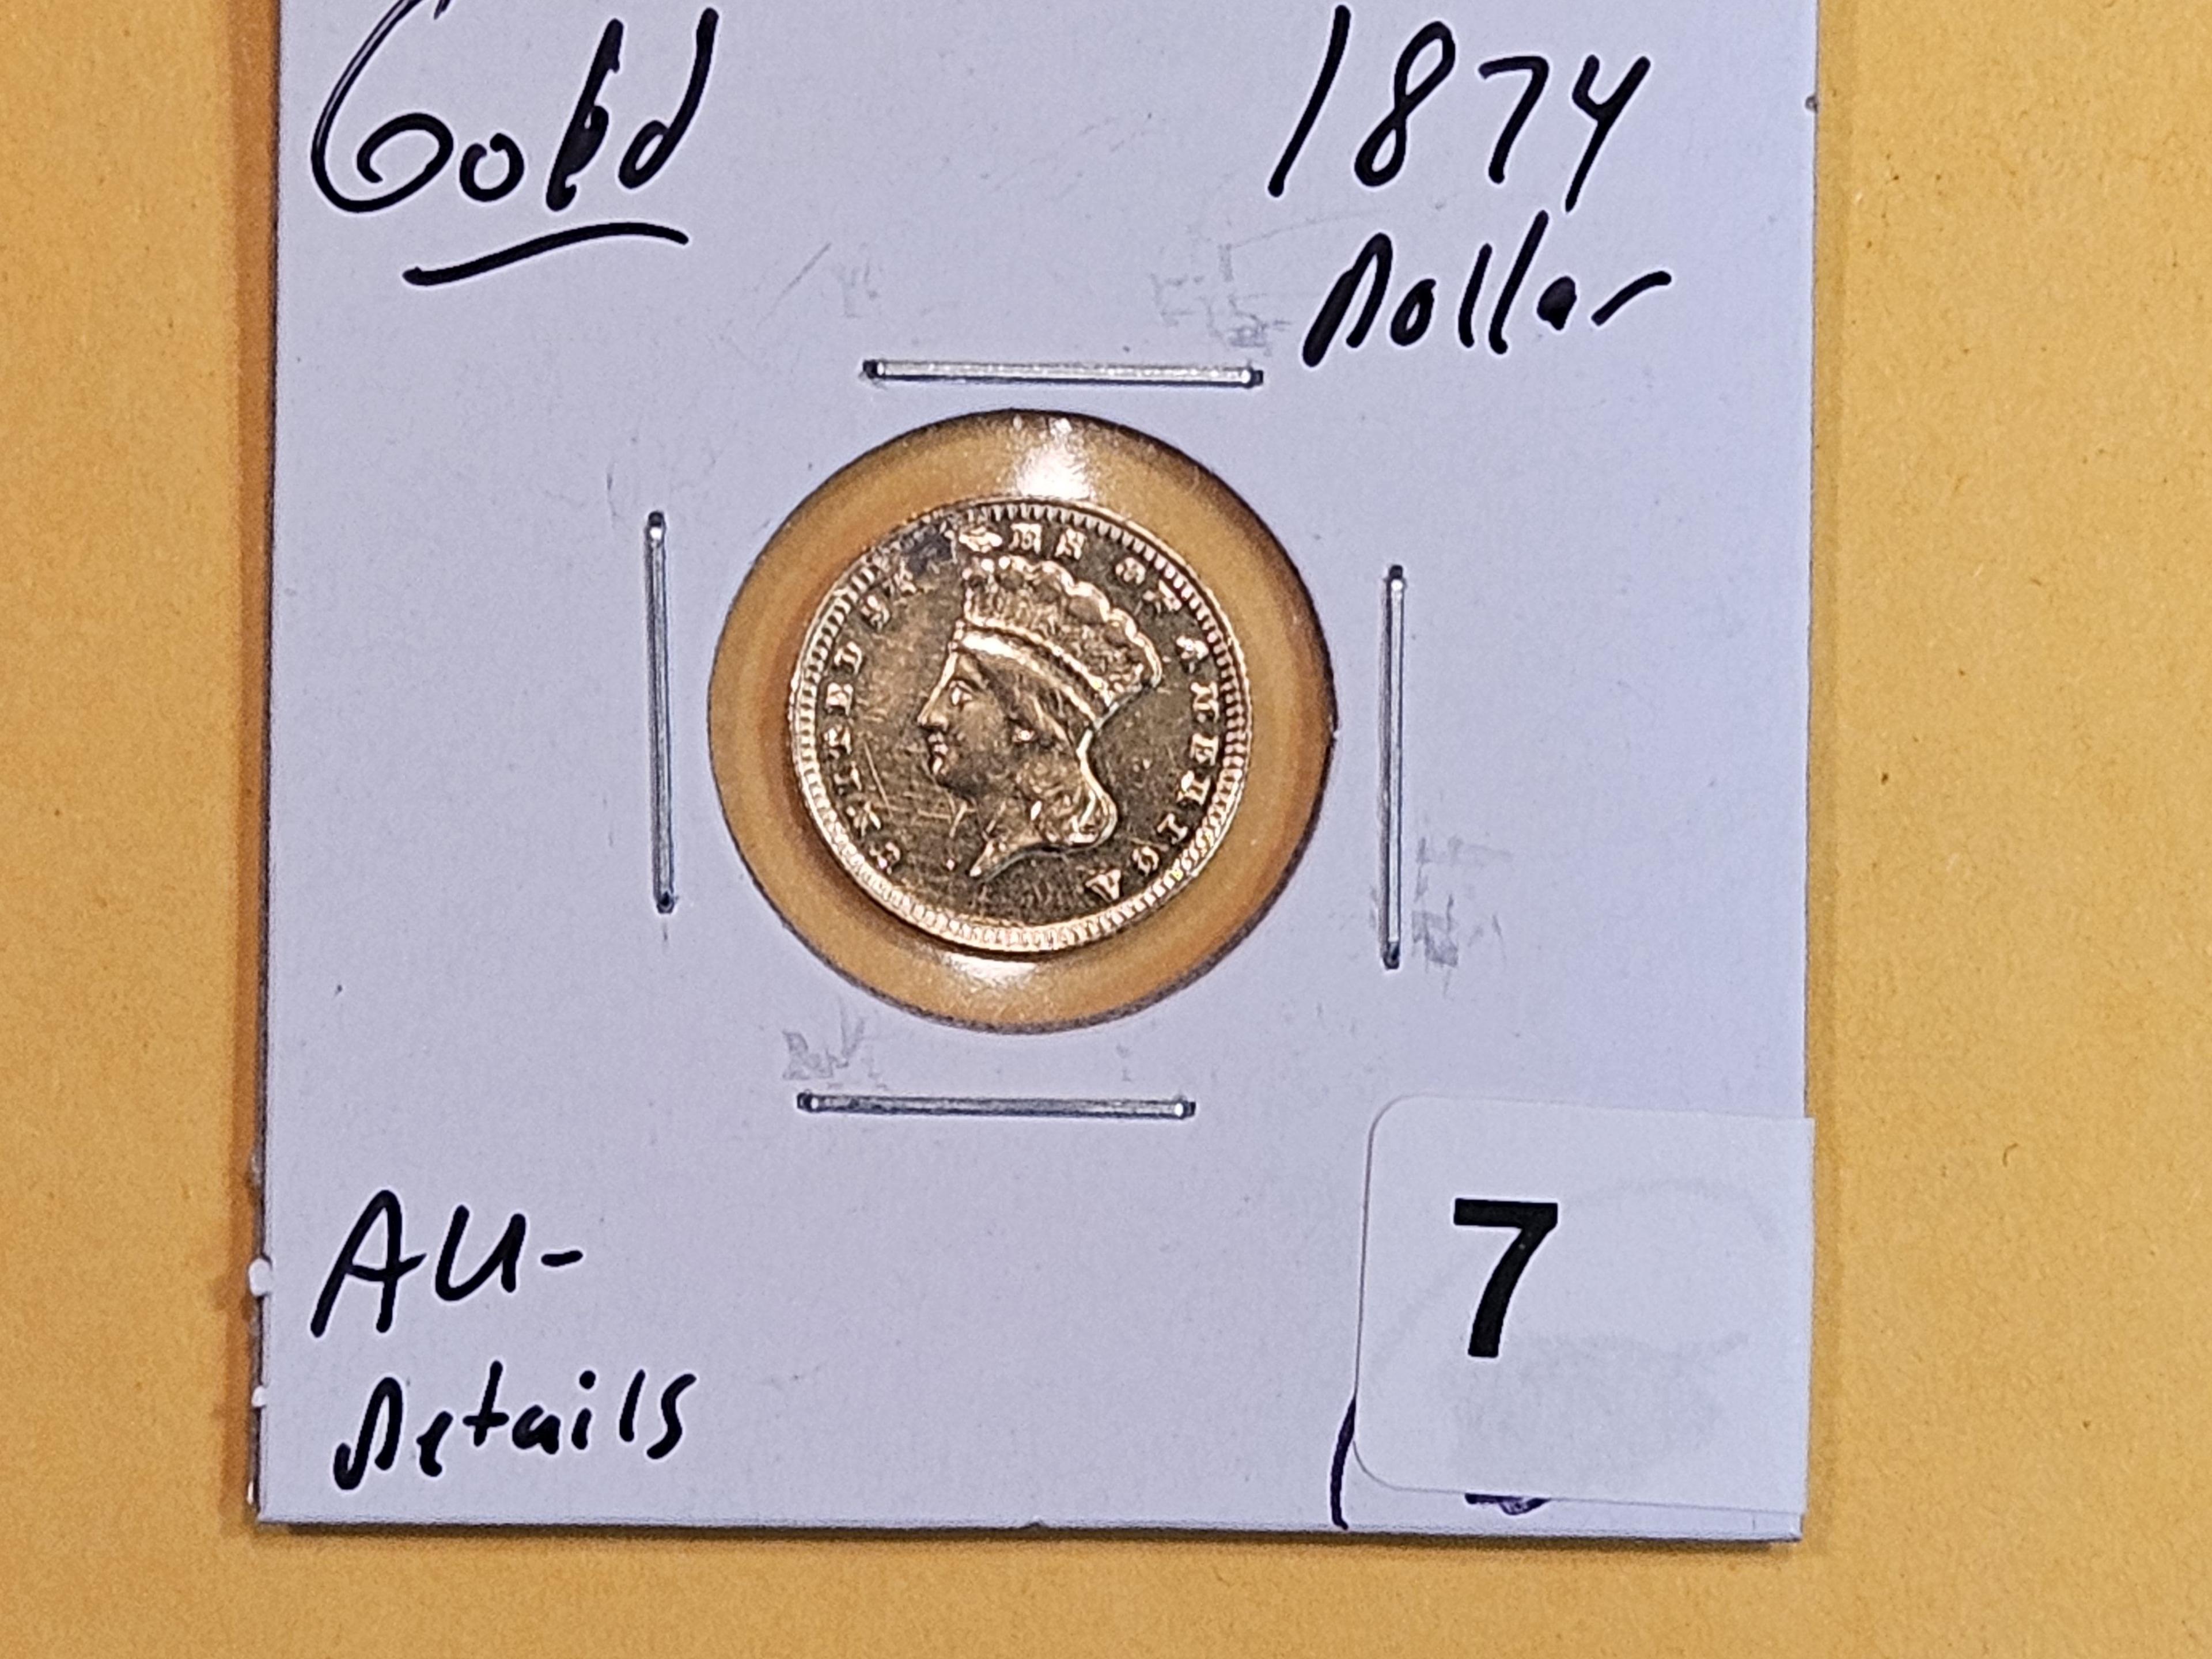 GOLD! Brilliant About Uncirculated -details 1874 Gold Dollar